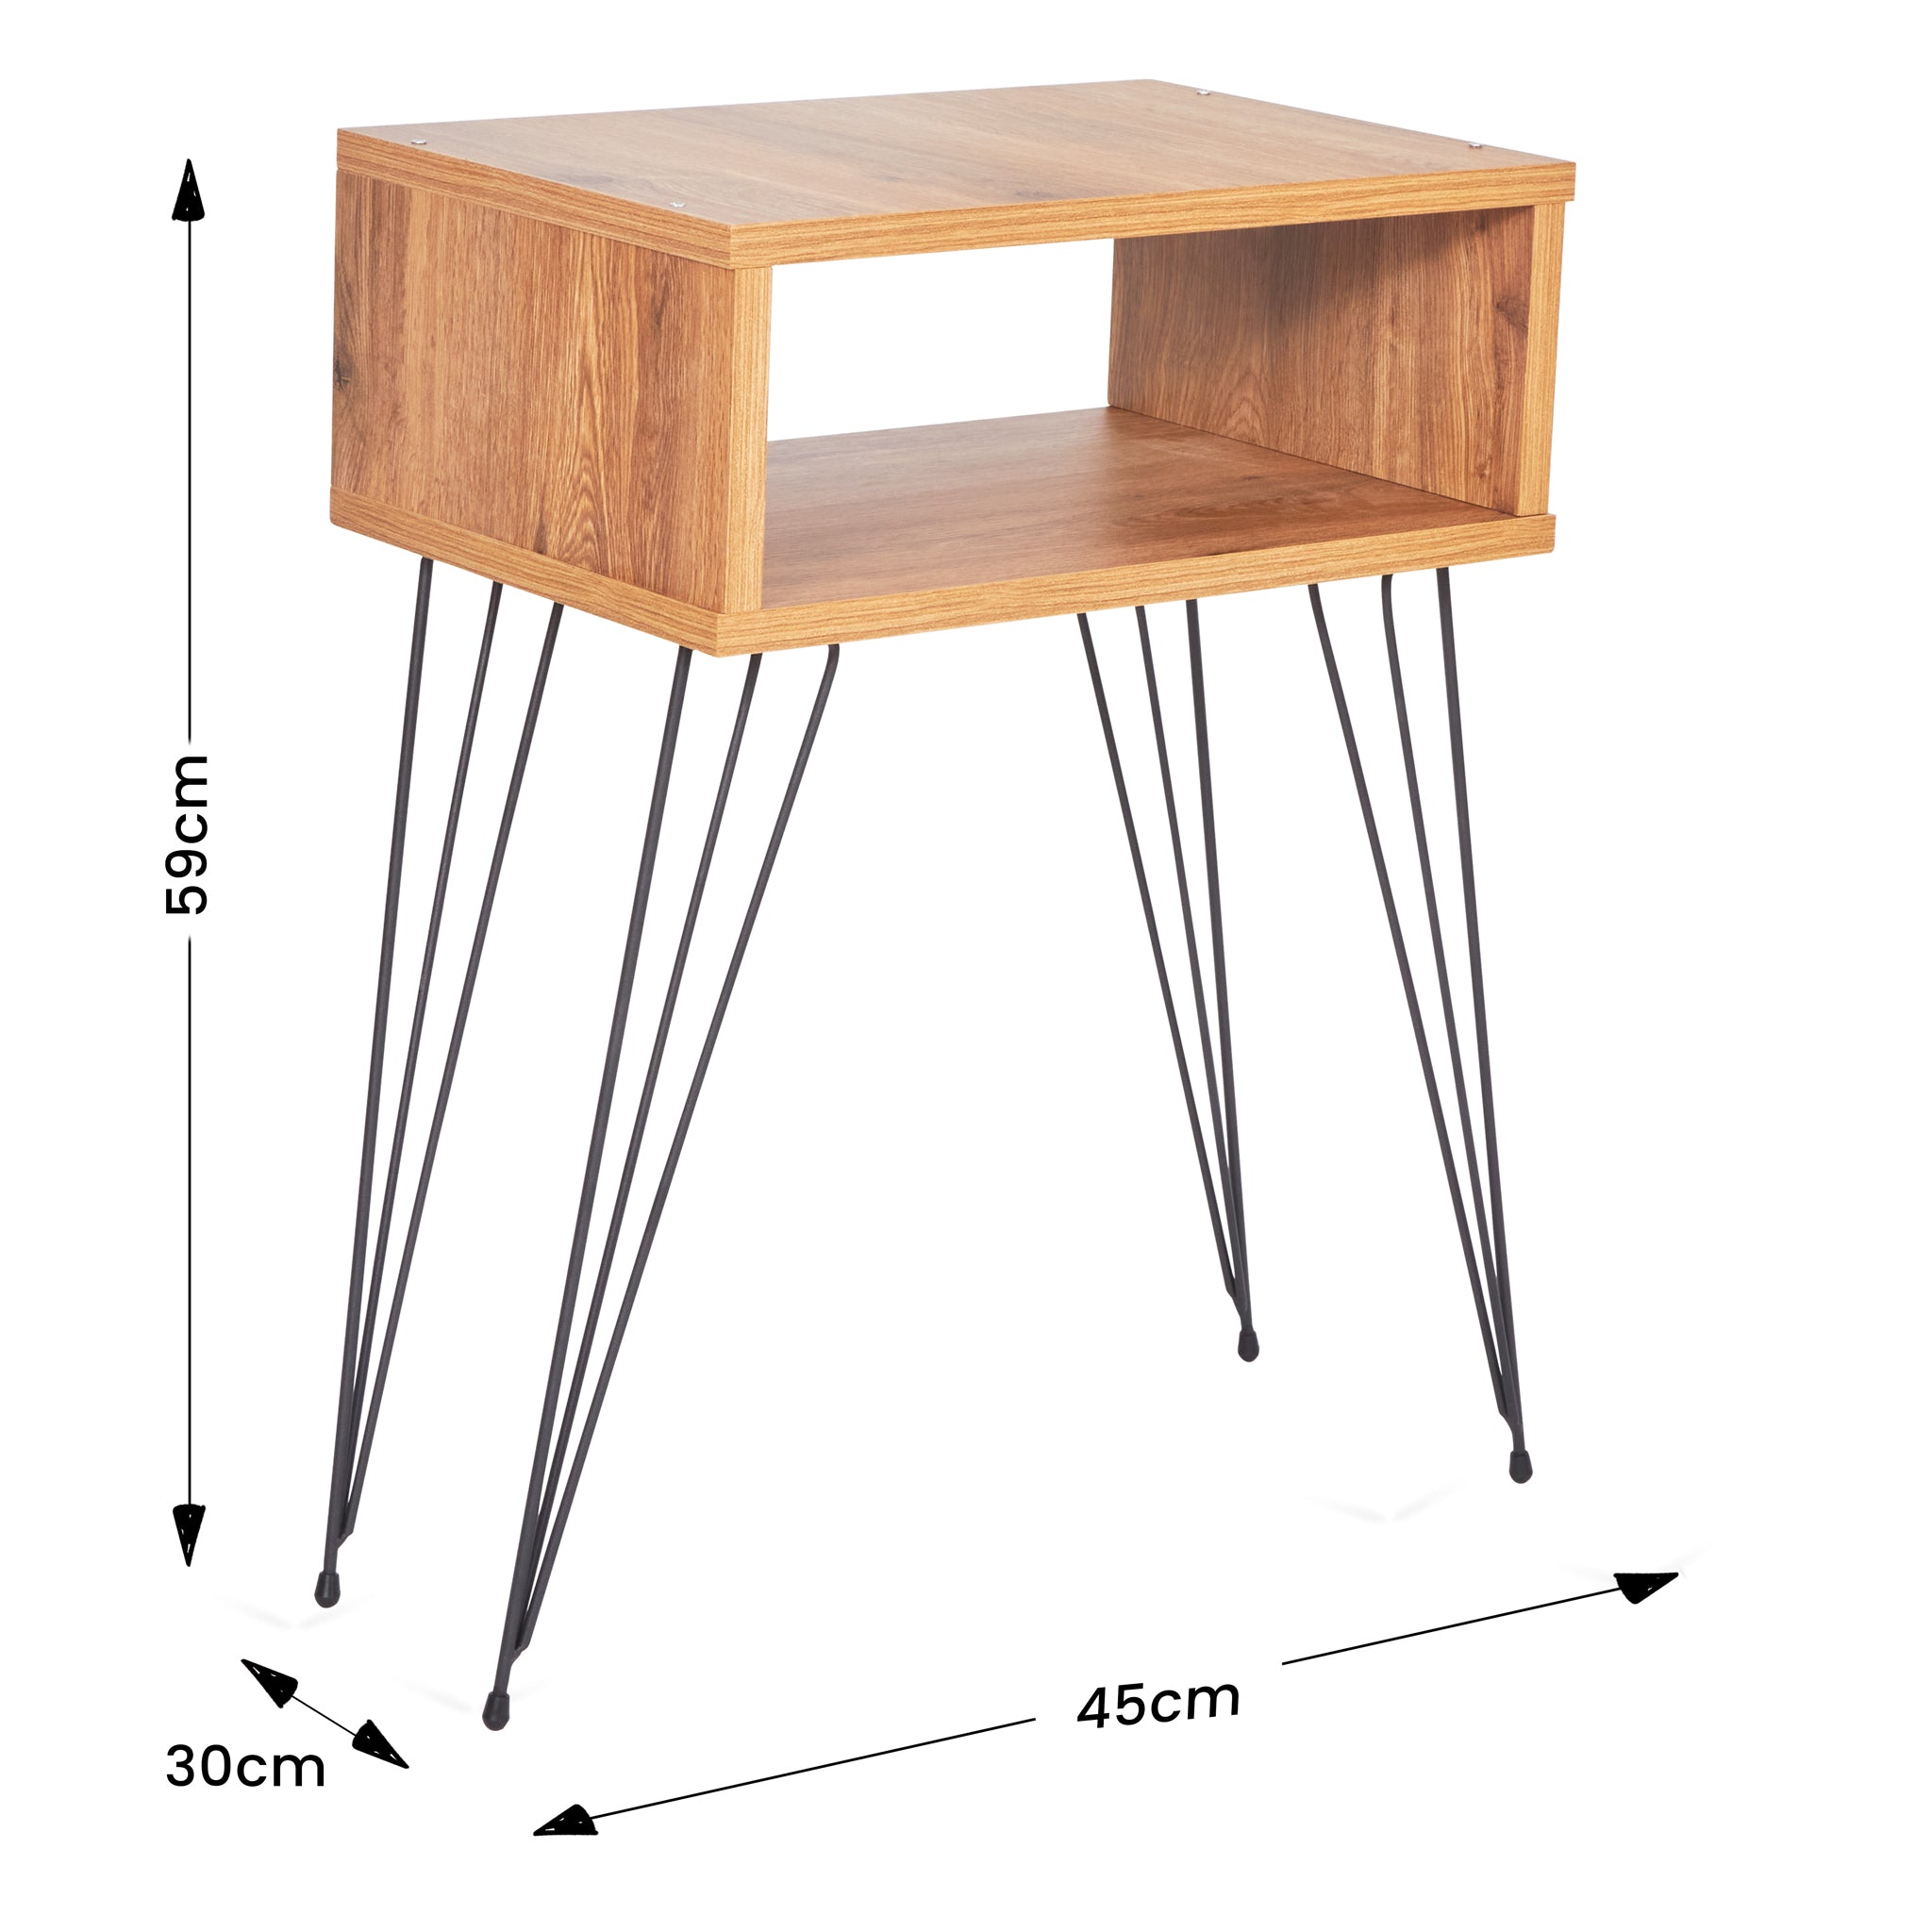 Retro Style Bedside Table With Hairpin Legs - Atlantic Pine